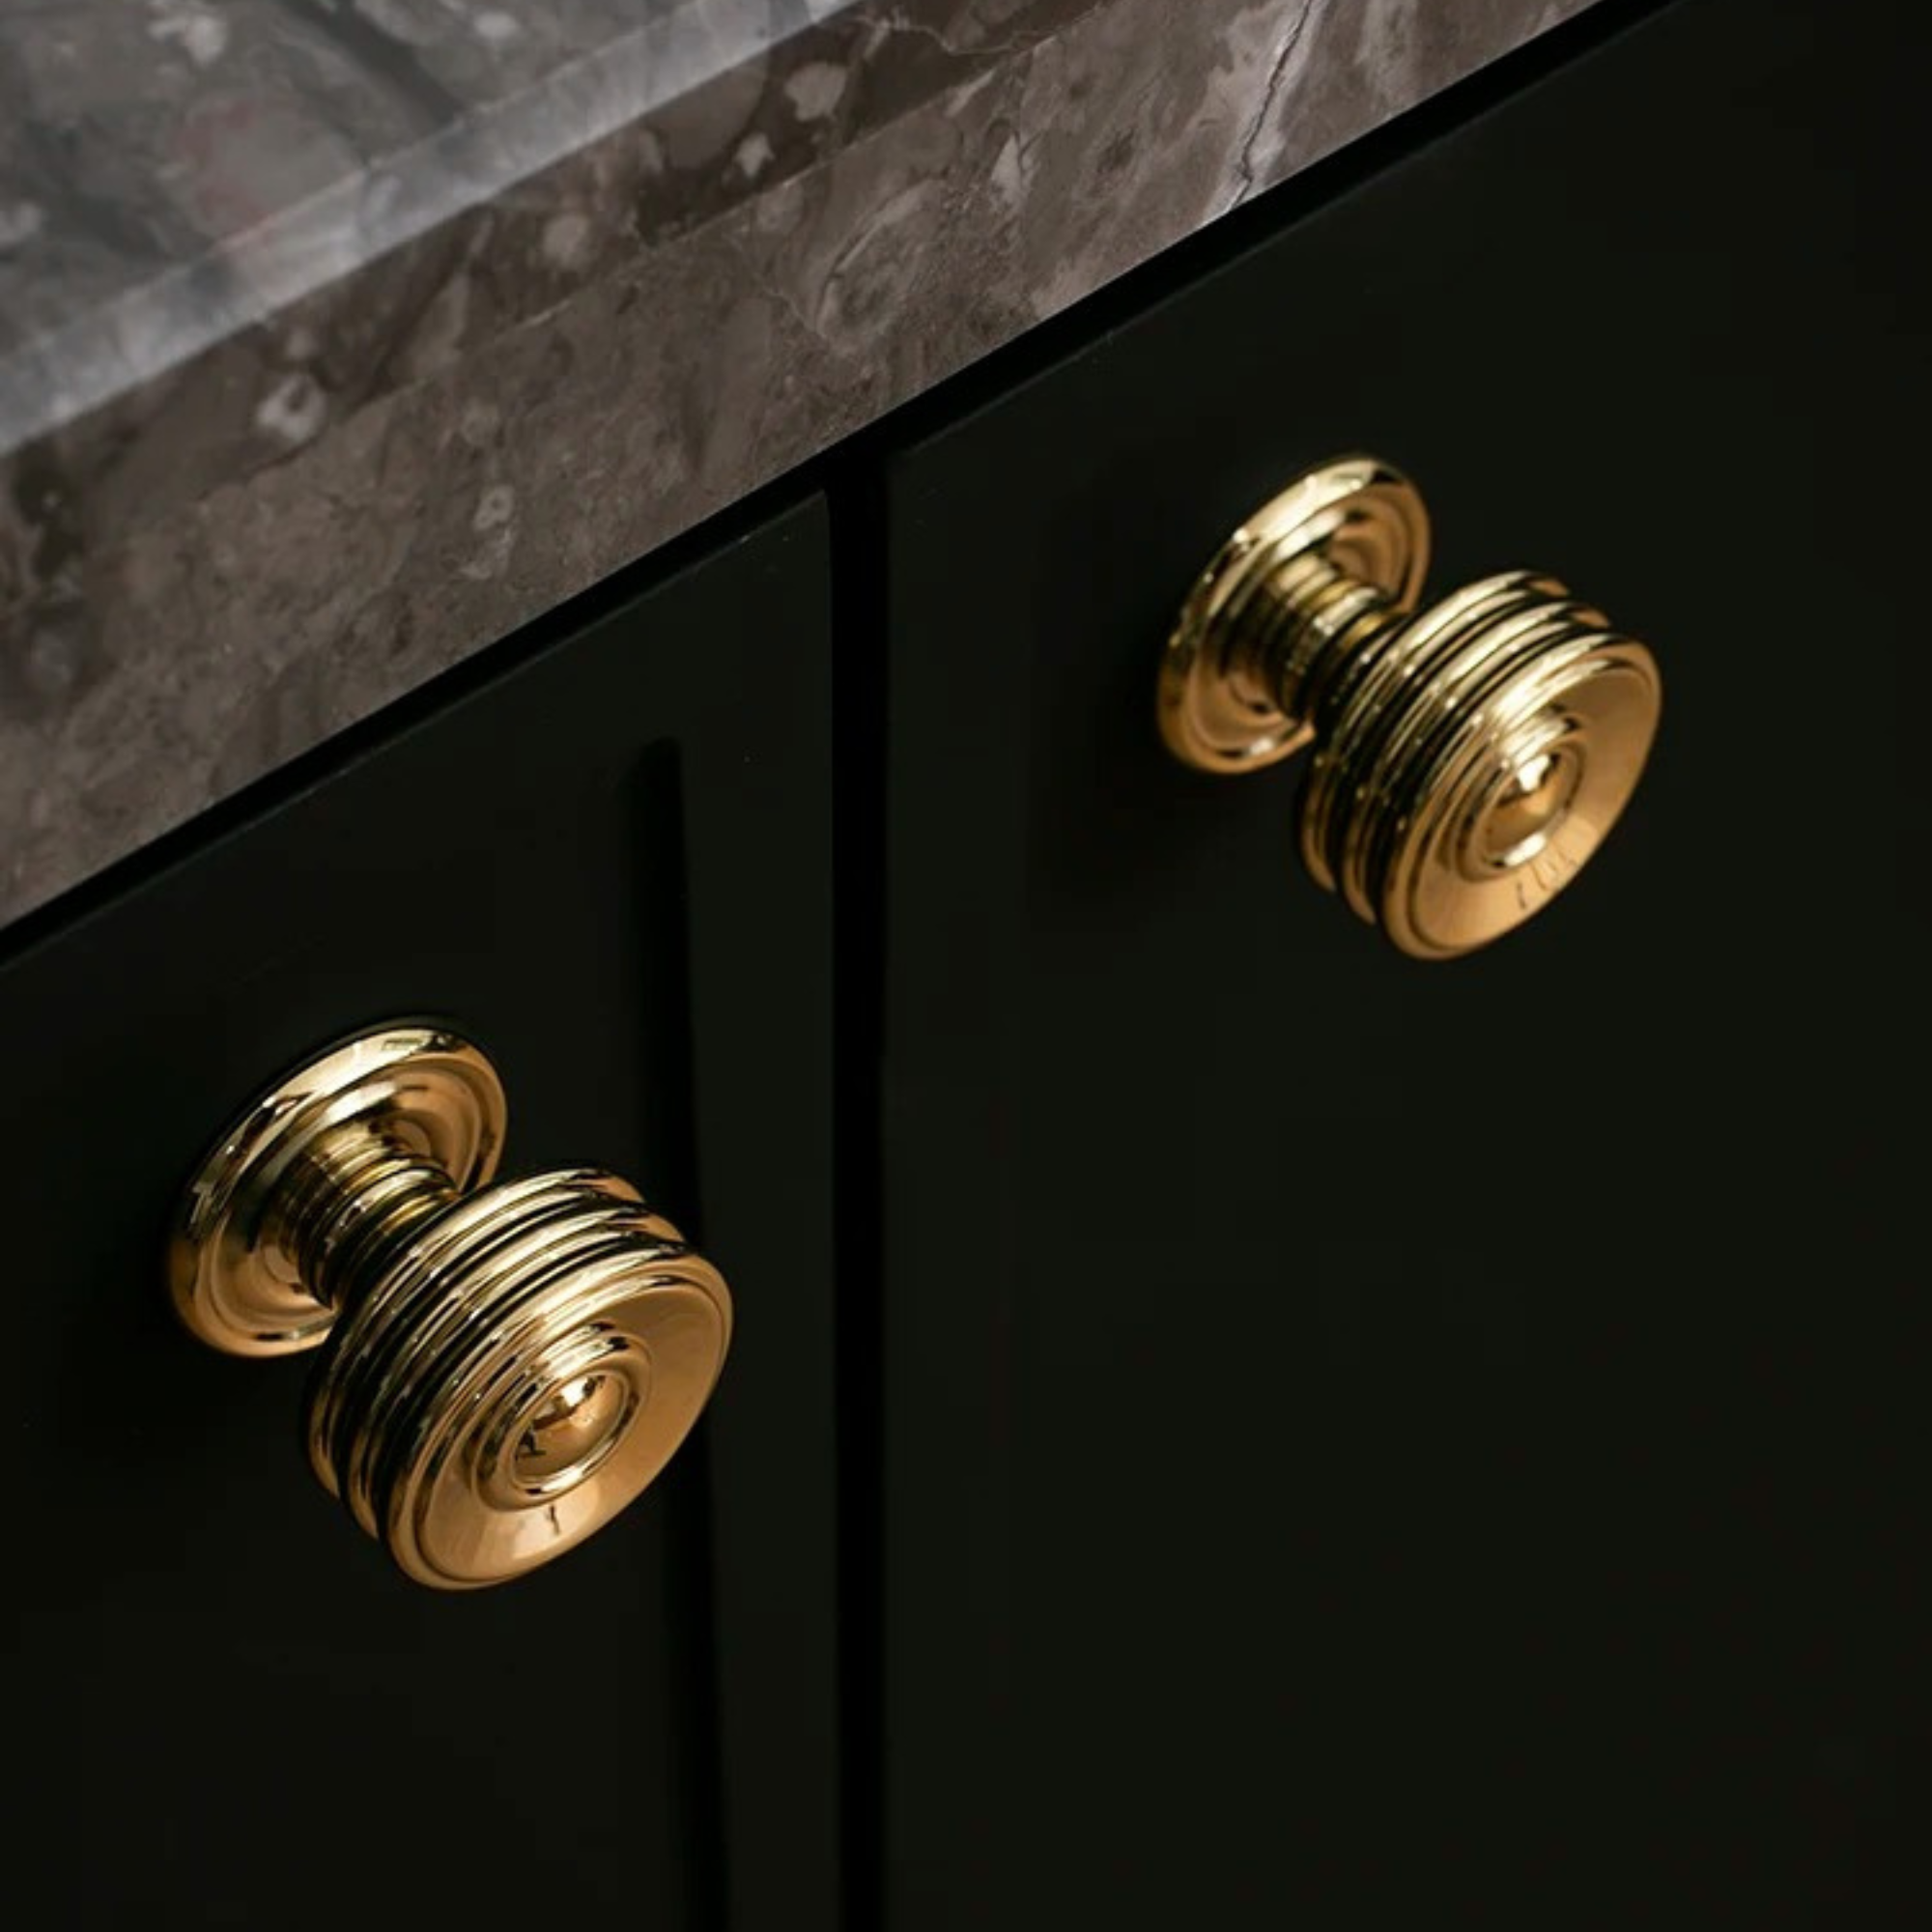 Polished Brass Curved Pull Handles | Curva